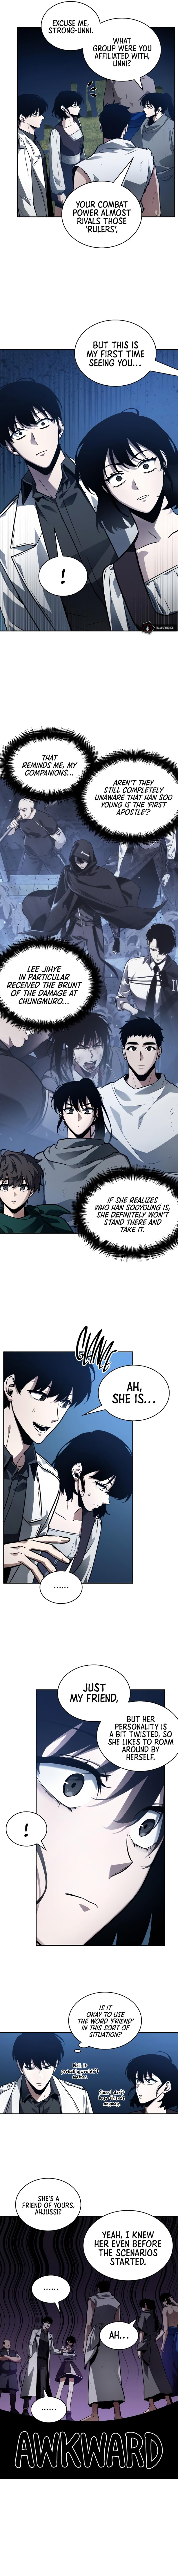 Omniscient Reader's Viewpoint - Chapter 134 Page 9